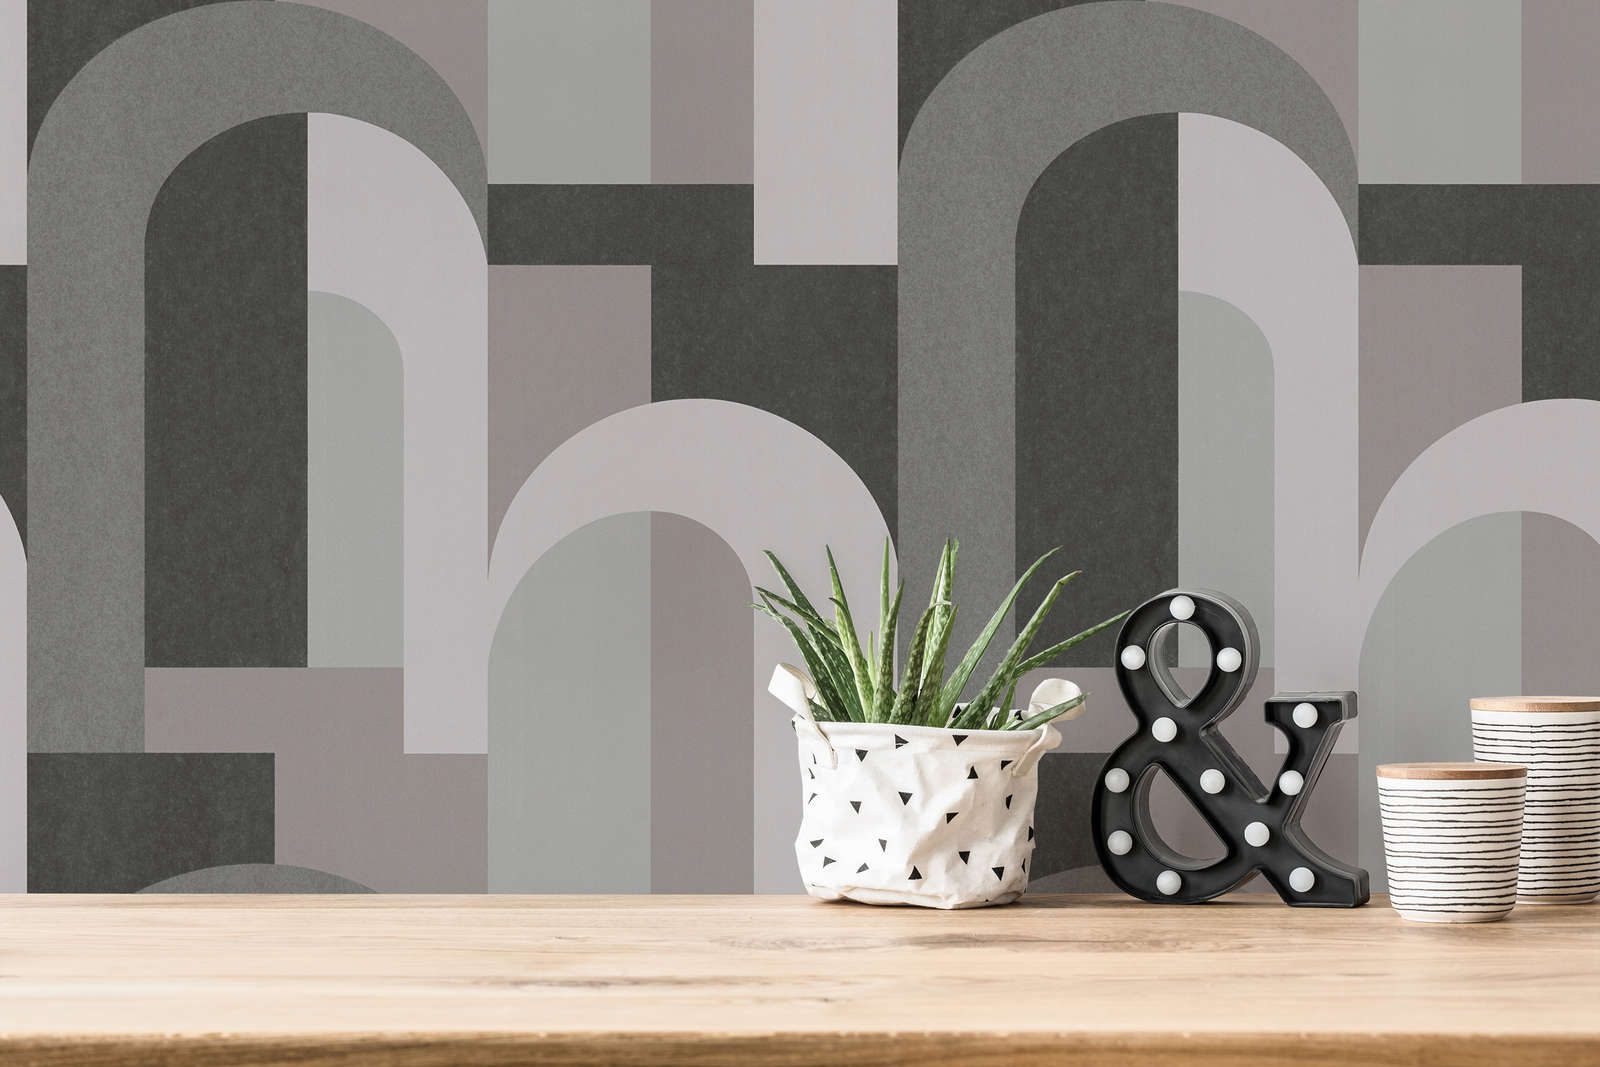             Non-woven wallpaper with bow pattern - grey, black
        